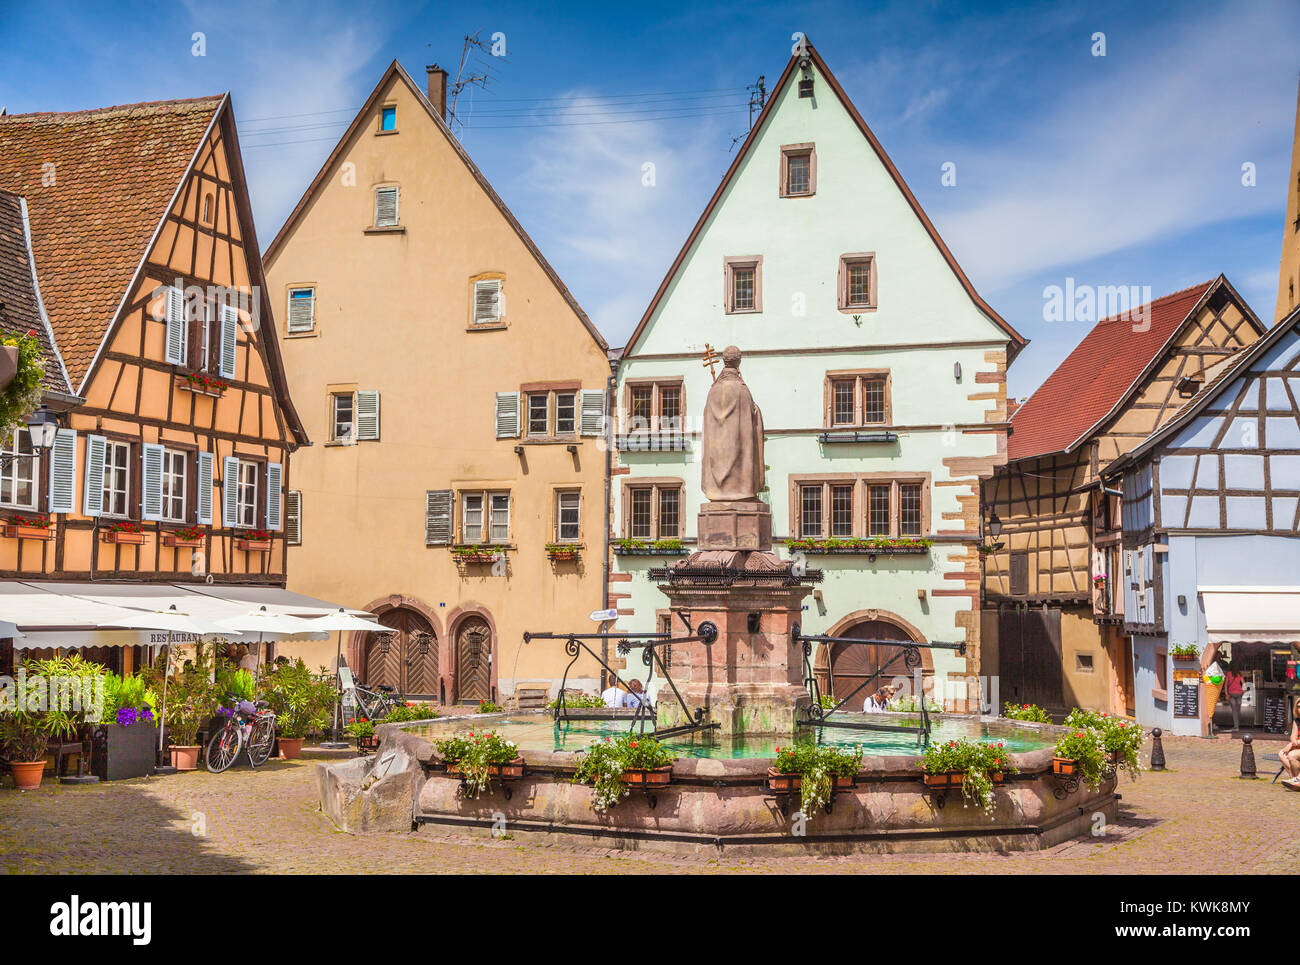 Historic town square of Eguisheim, a popular tourist destination along the famous Alsace Wine Route, in summer, Alsace region, France Stock Photo